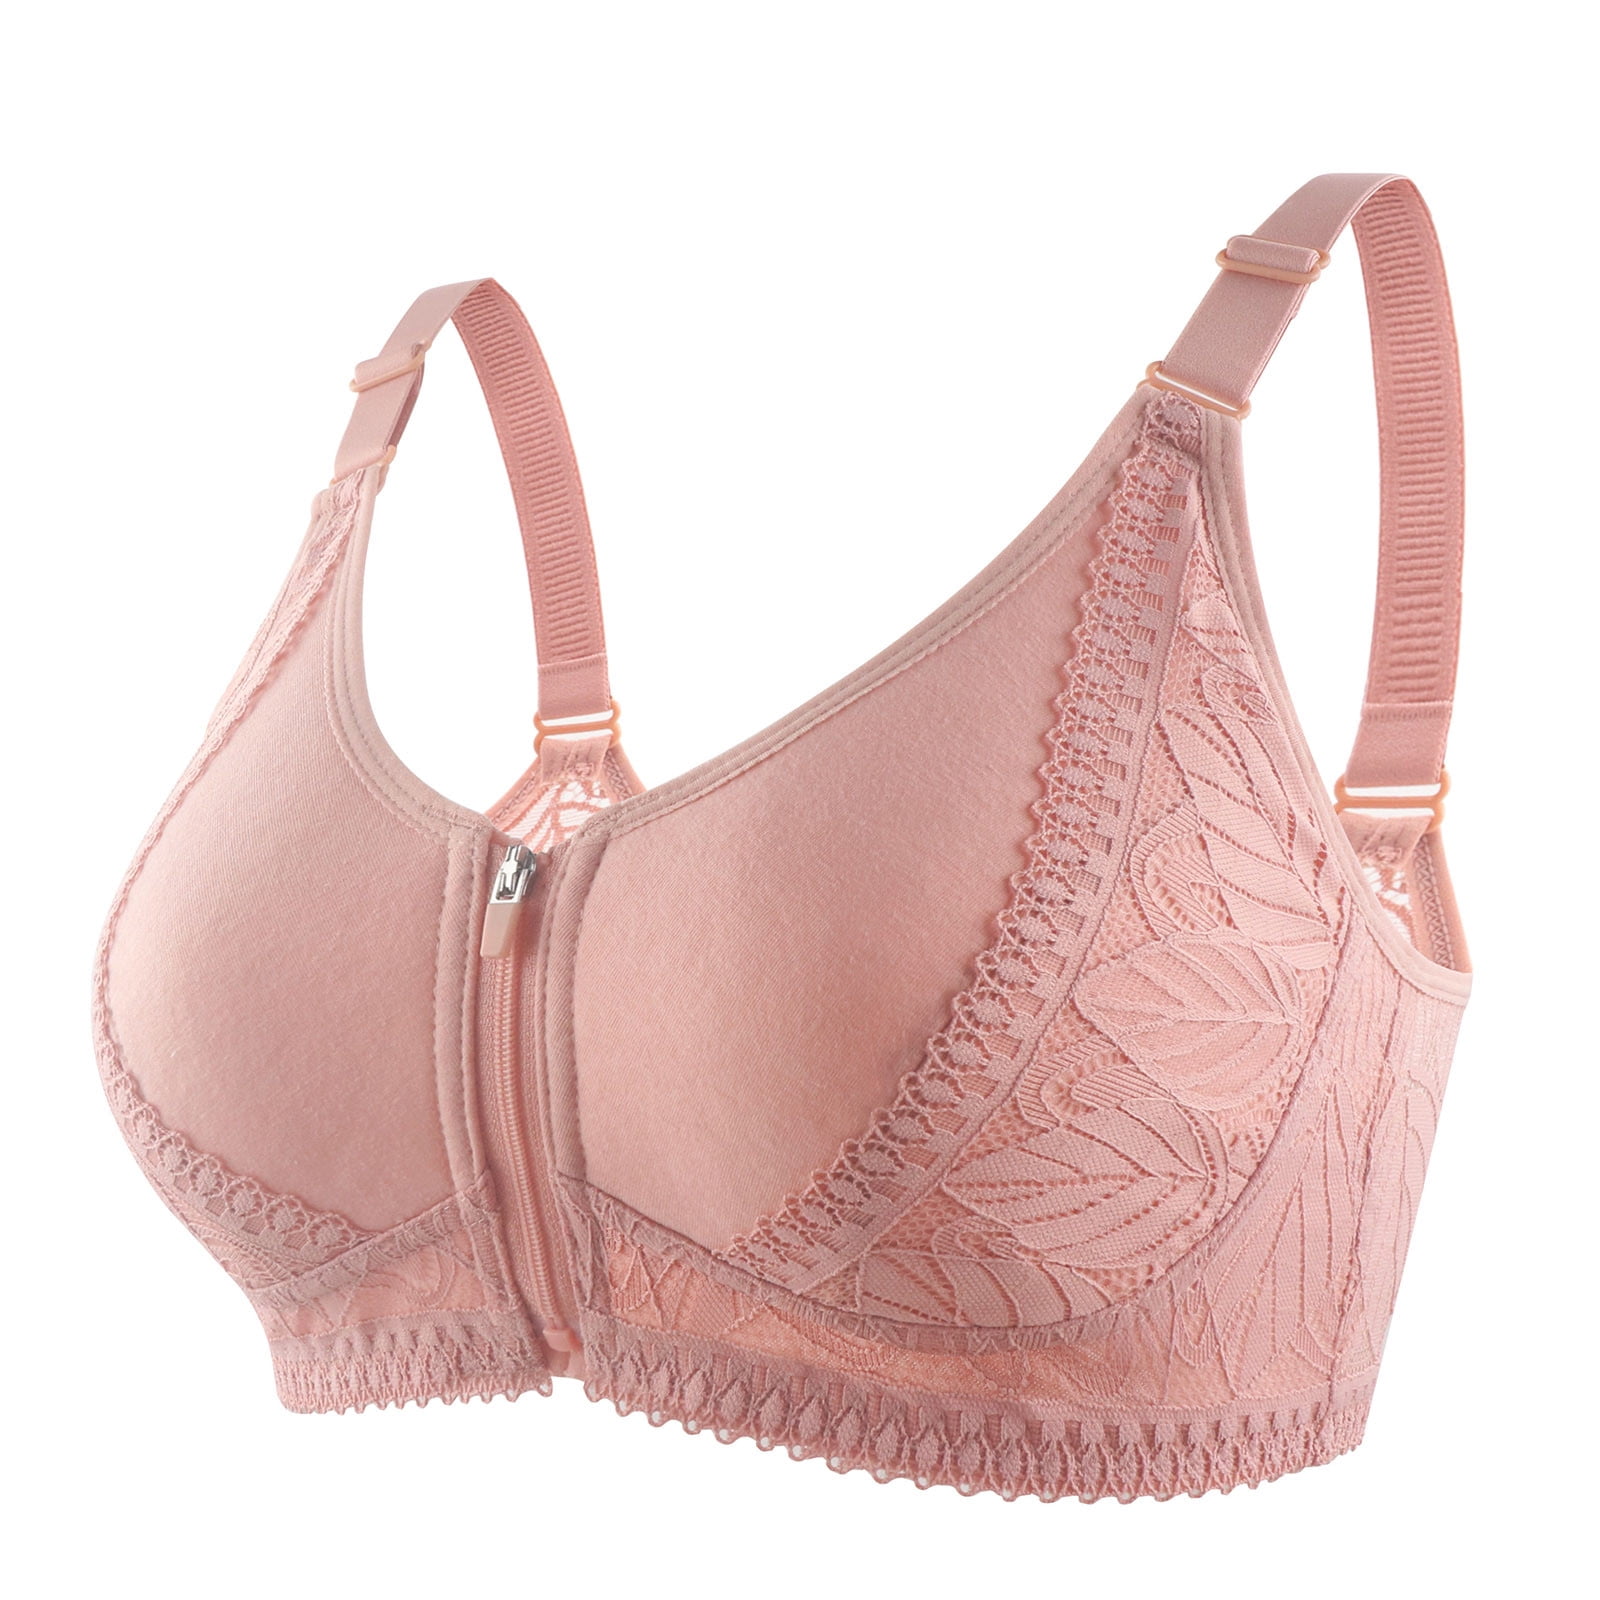 Pin on bras and bra typs